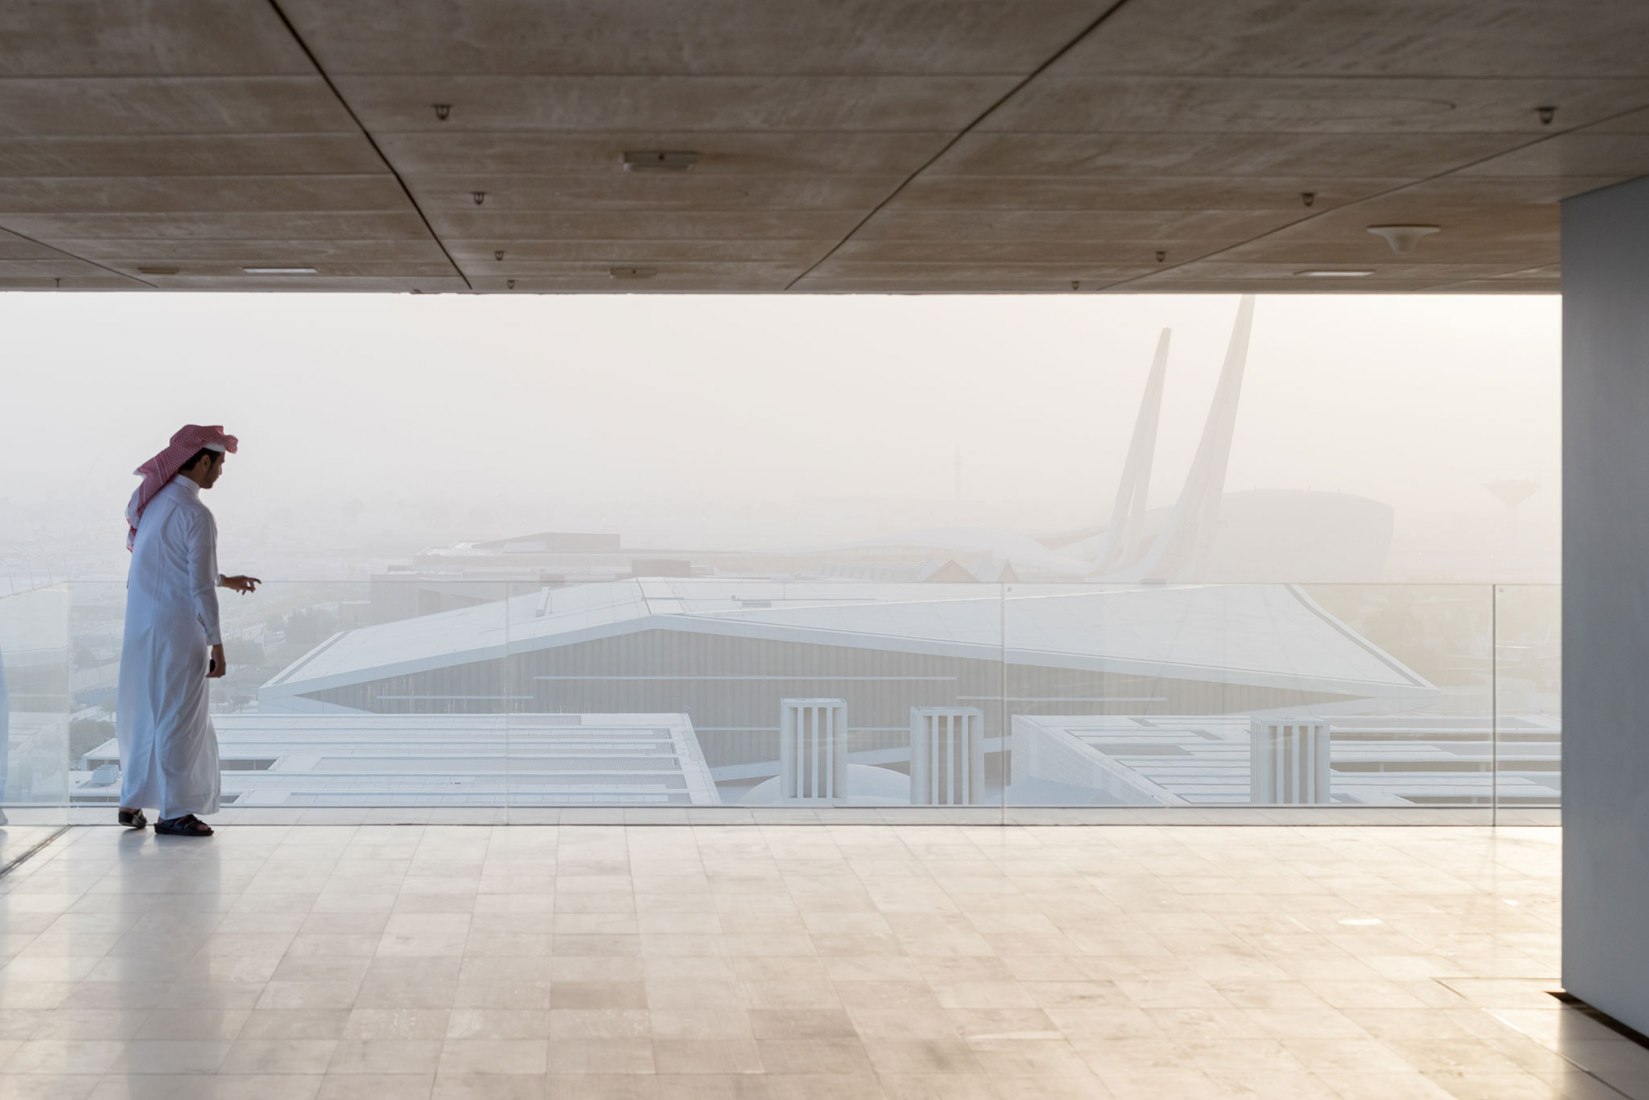 Exterior view from another building. Qatar National Library by OMA. Photograph by Iwan Baan, Courtesy of OMA